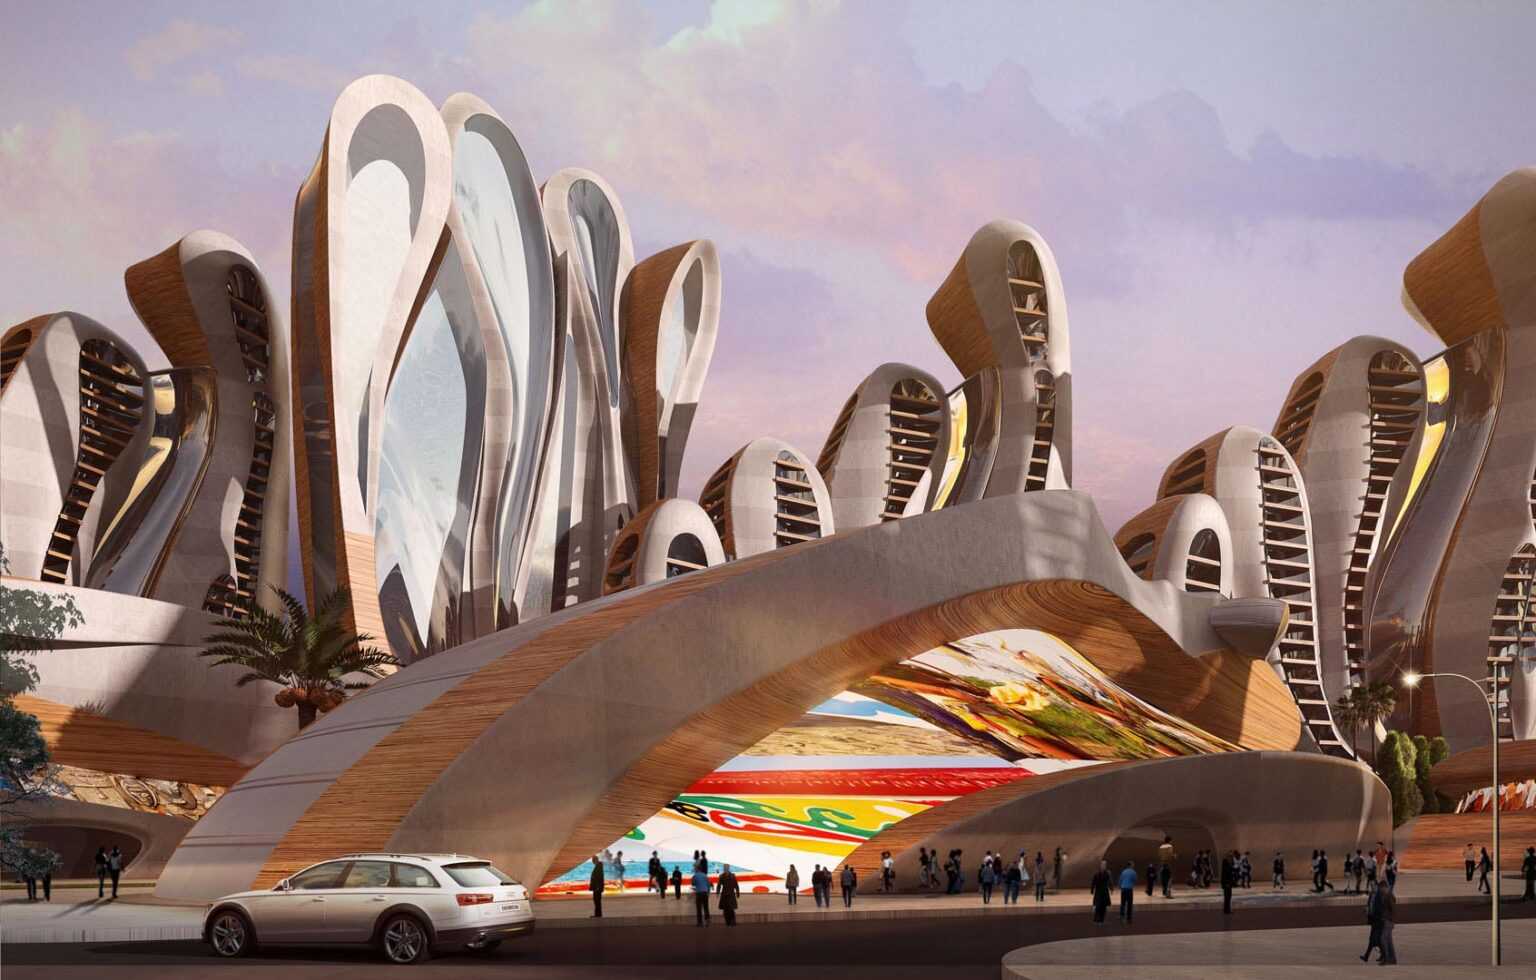 An artists rendering of a futuristic city in Africa